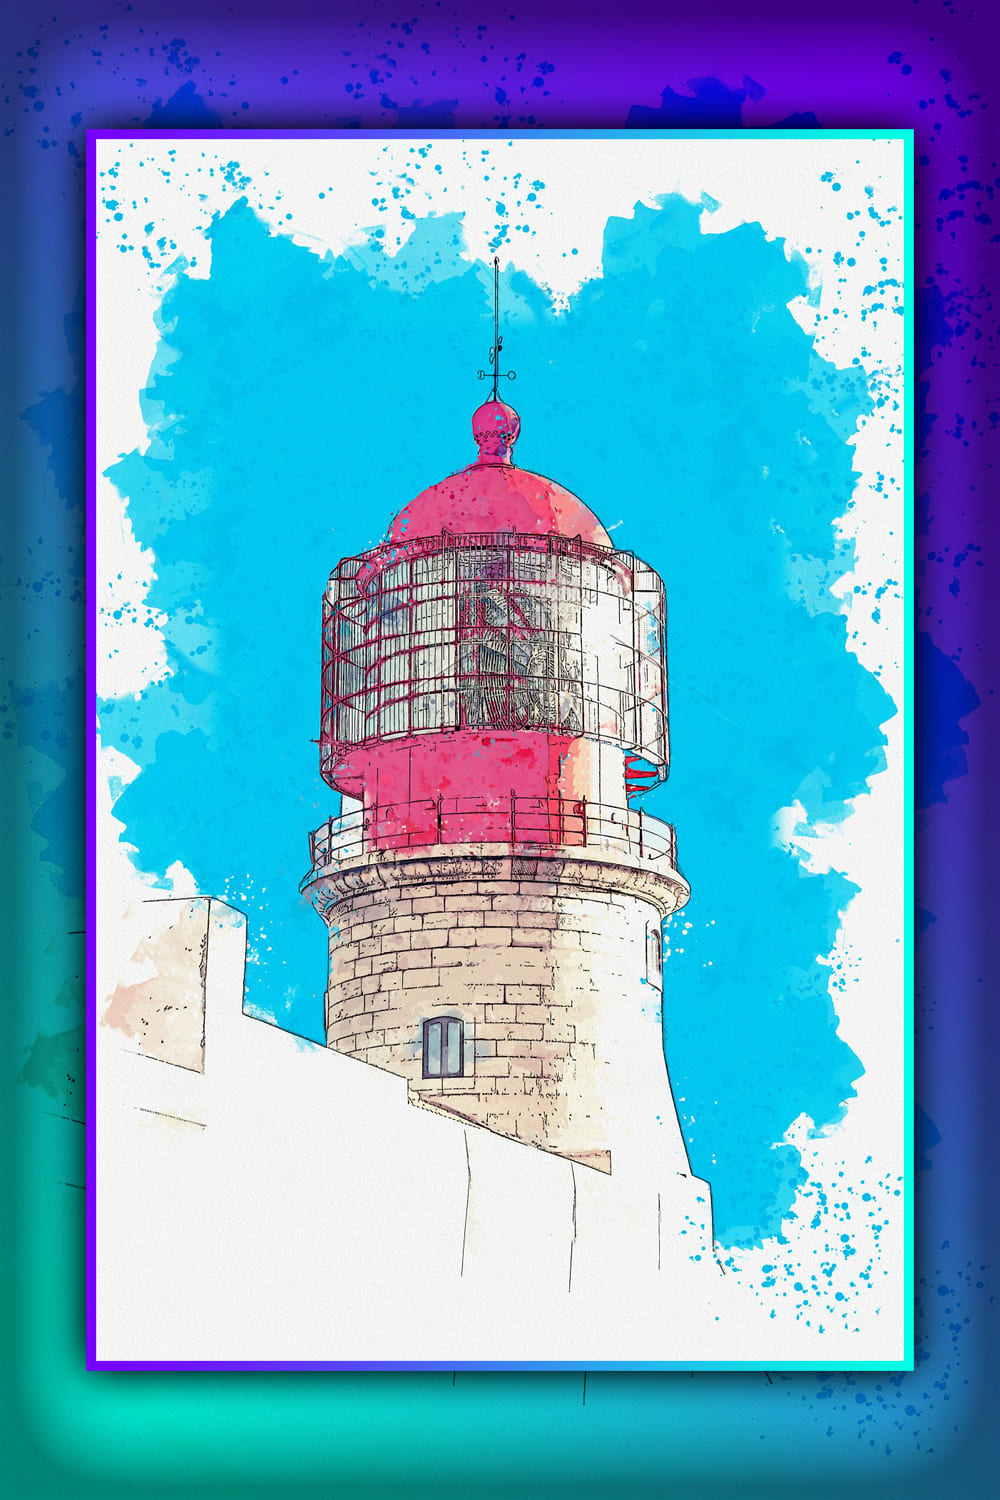 Watercolor drawing of a lighthouse with a metal spire on the roof.